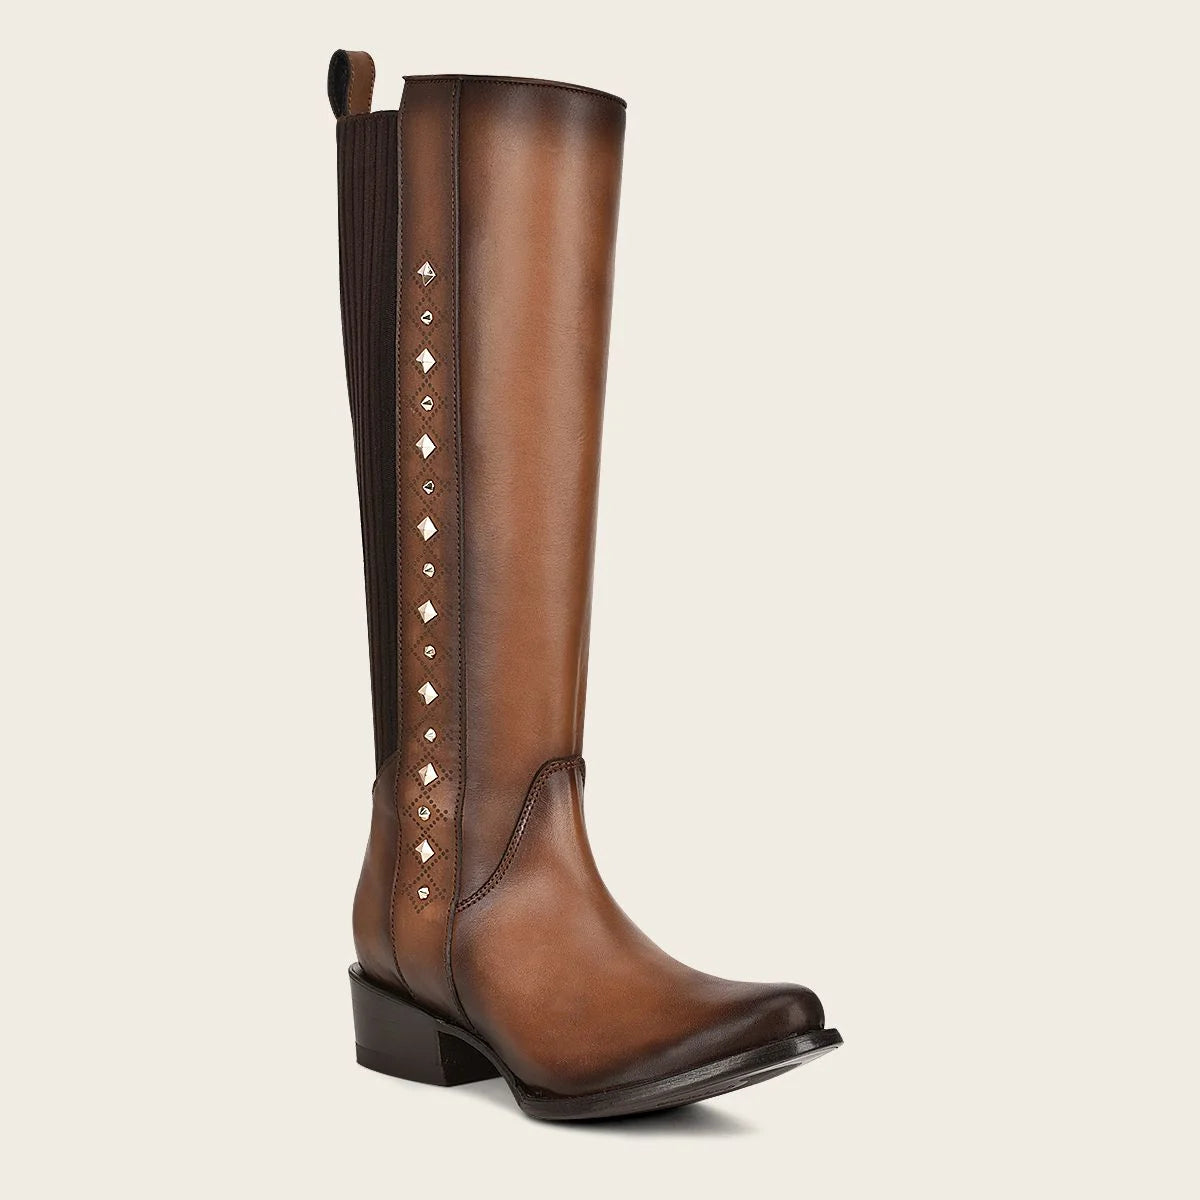 Brown high boot with laser engraving and studs - 1X4FRS - Cuadra Shop